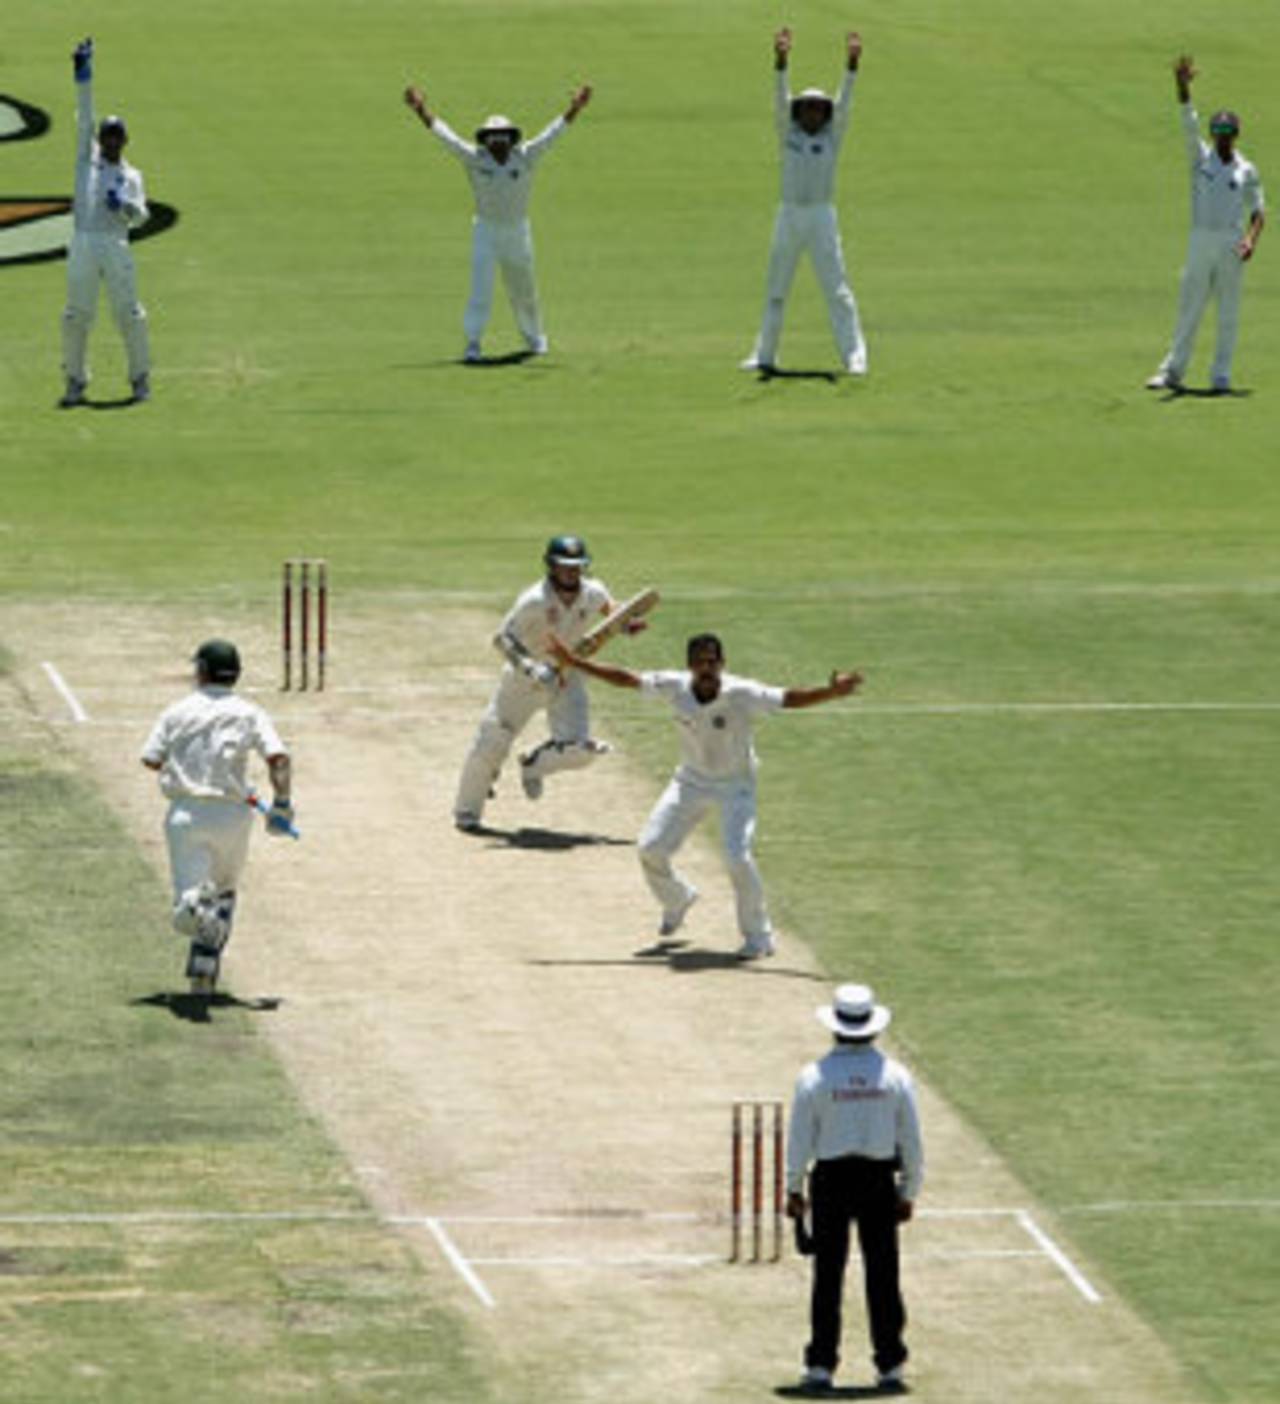 The Indians appeal against Chris Rogers, Australia v India, 3rd Test, Perth, 2nd day, January 17, 2008 